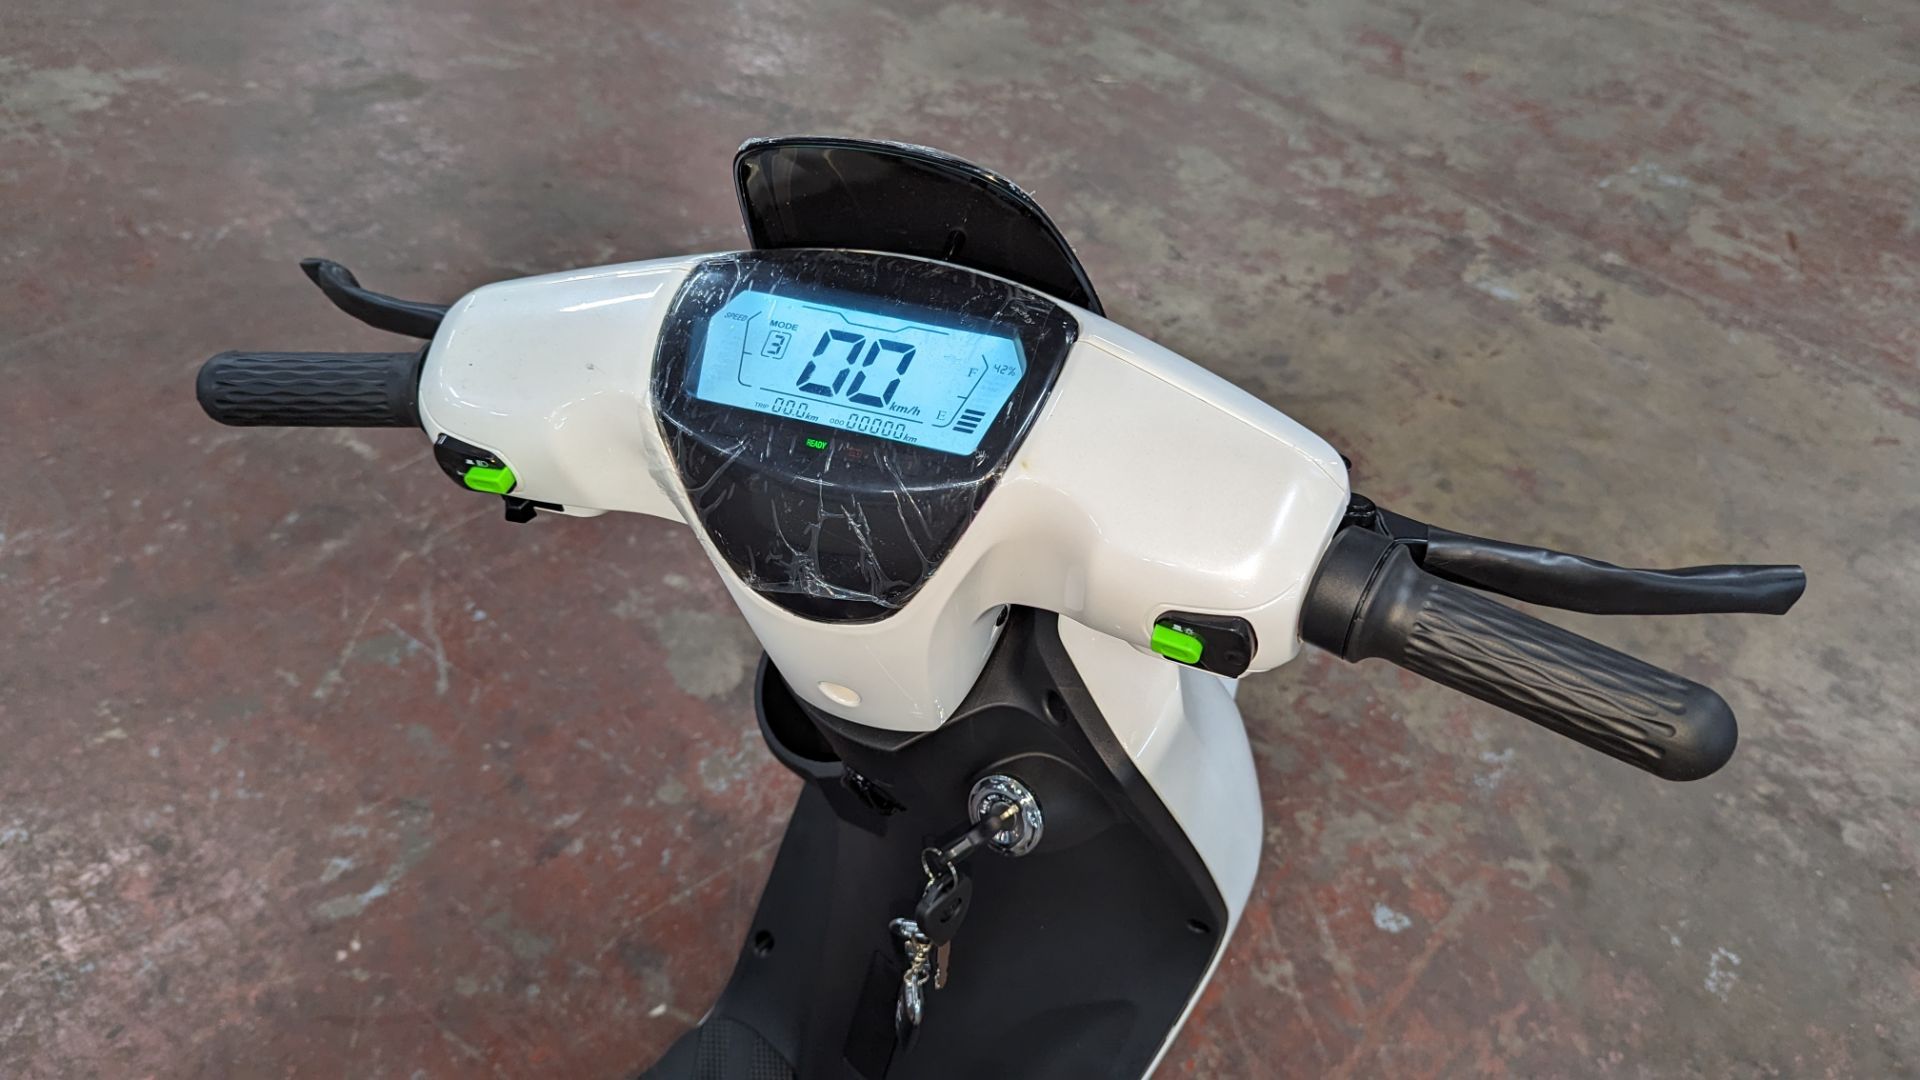 Model 18 Electric Bike: Zero (0) recorded miles, white body with black detailing, insulated box moun - Image 9 of 13